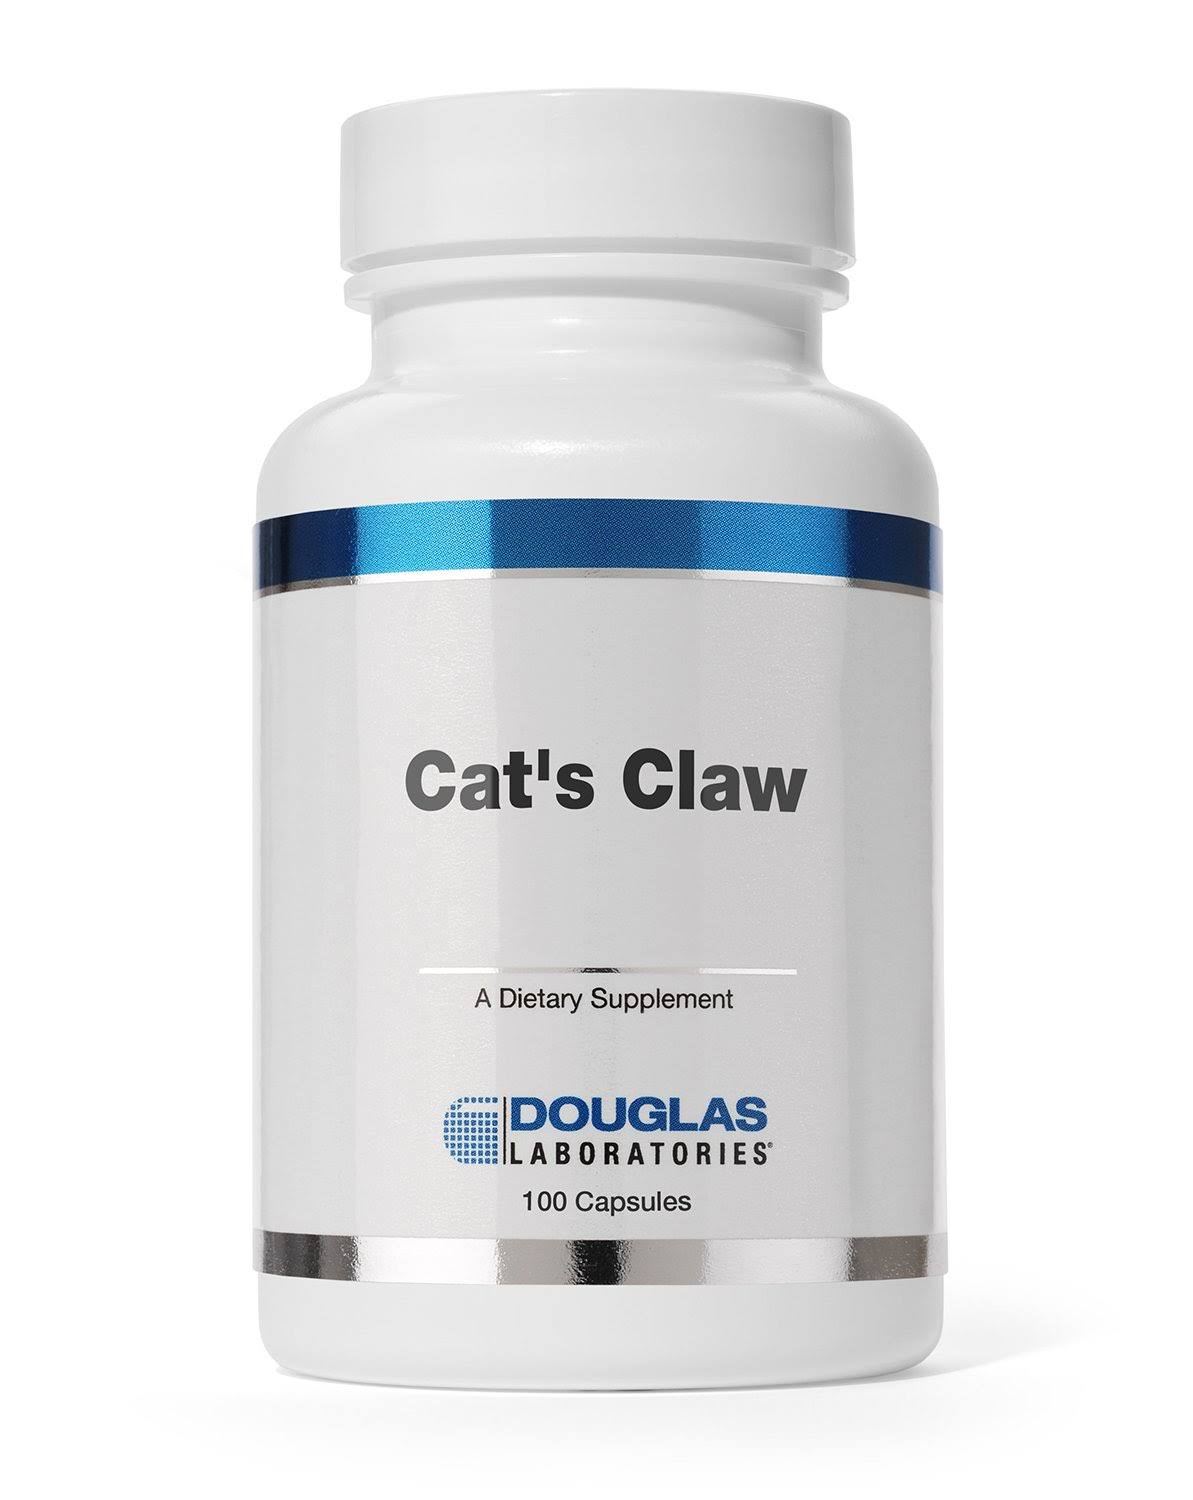 Douglas Laboratories - Cat's Claw - Supports Immune Health and Physica